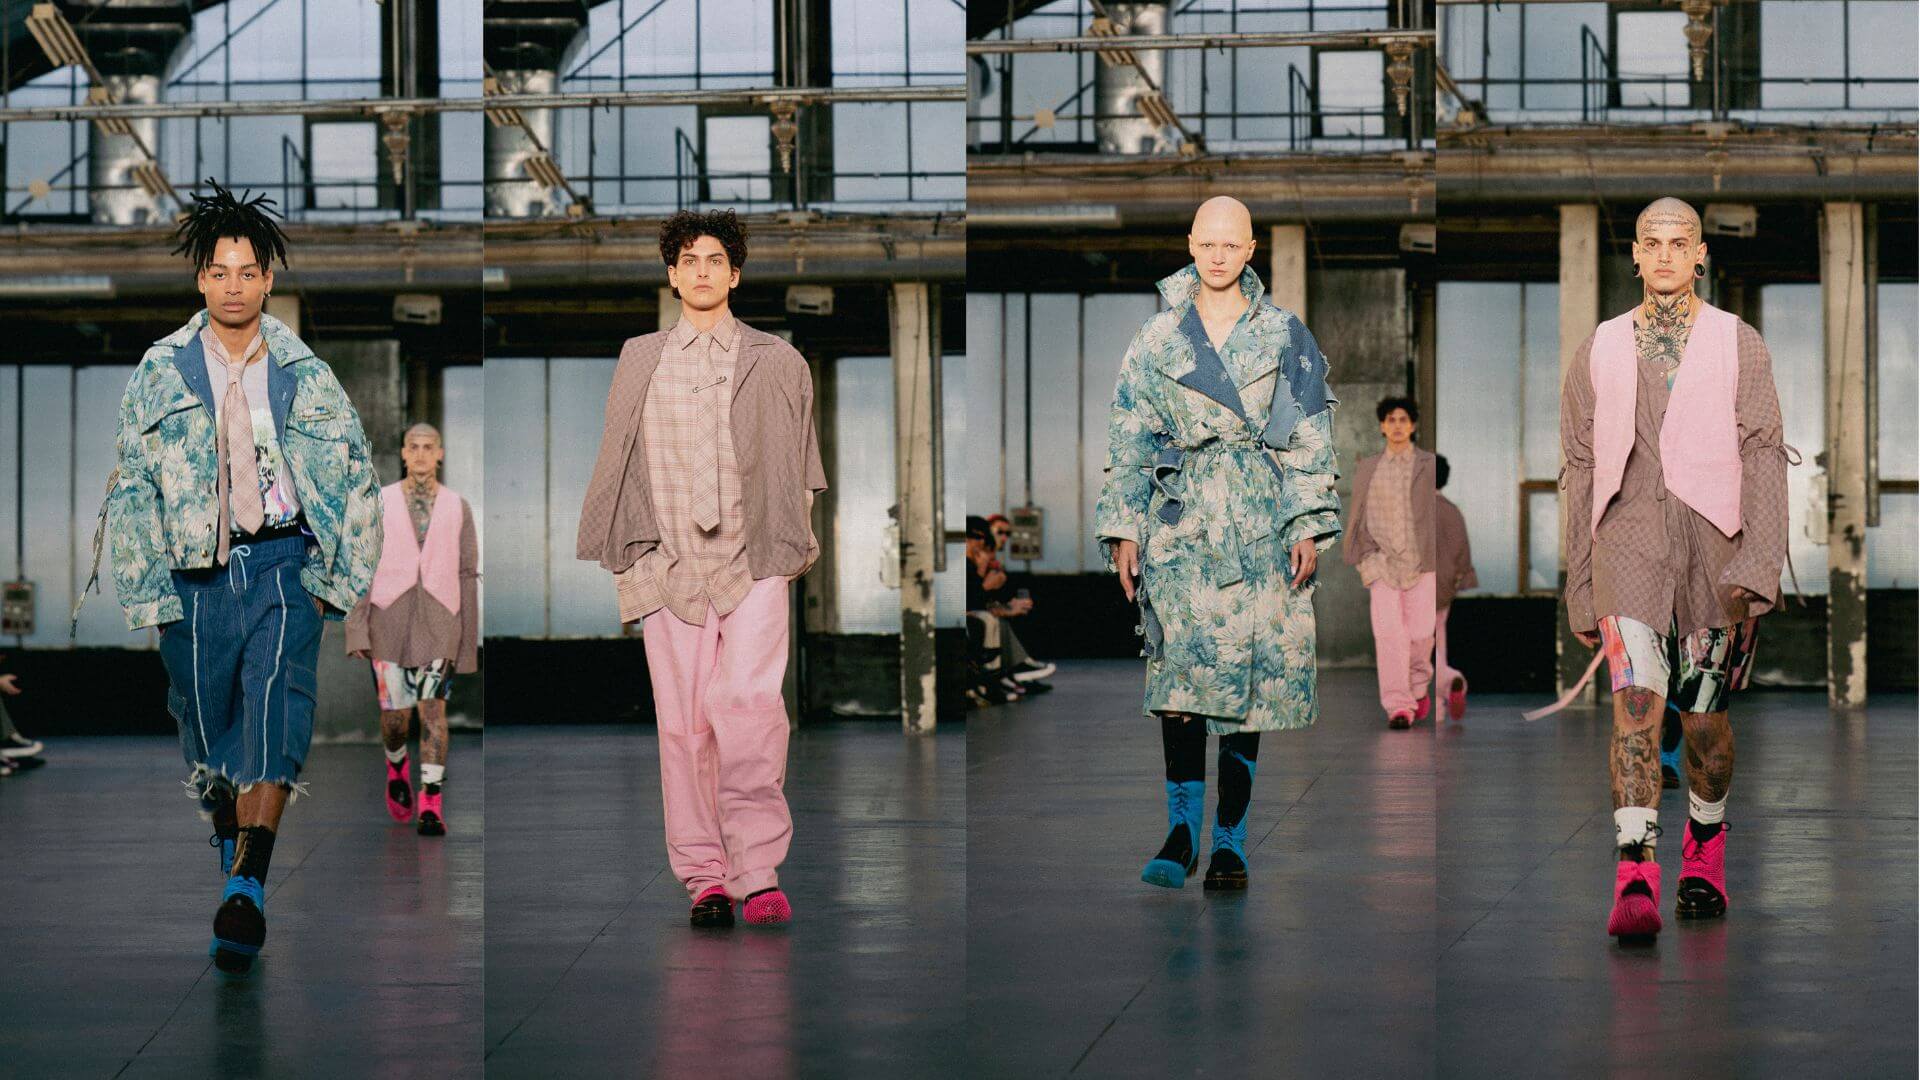 Models displaying contemporary fashion with a mix of oversized jackets, pastel colors, and unique textures on a runway.